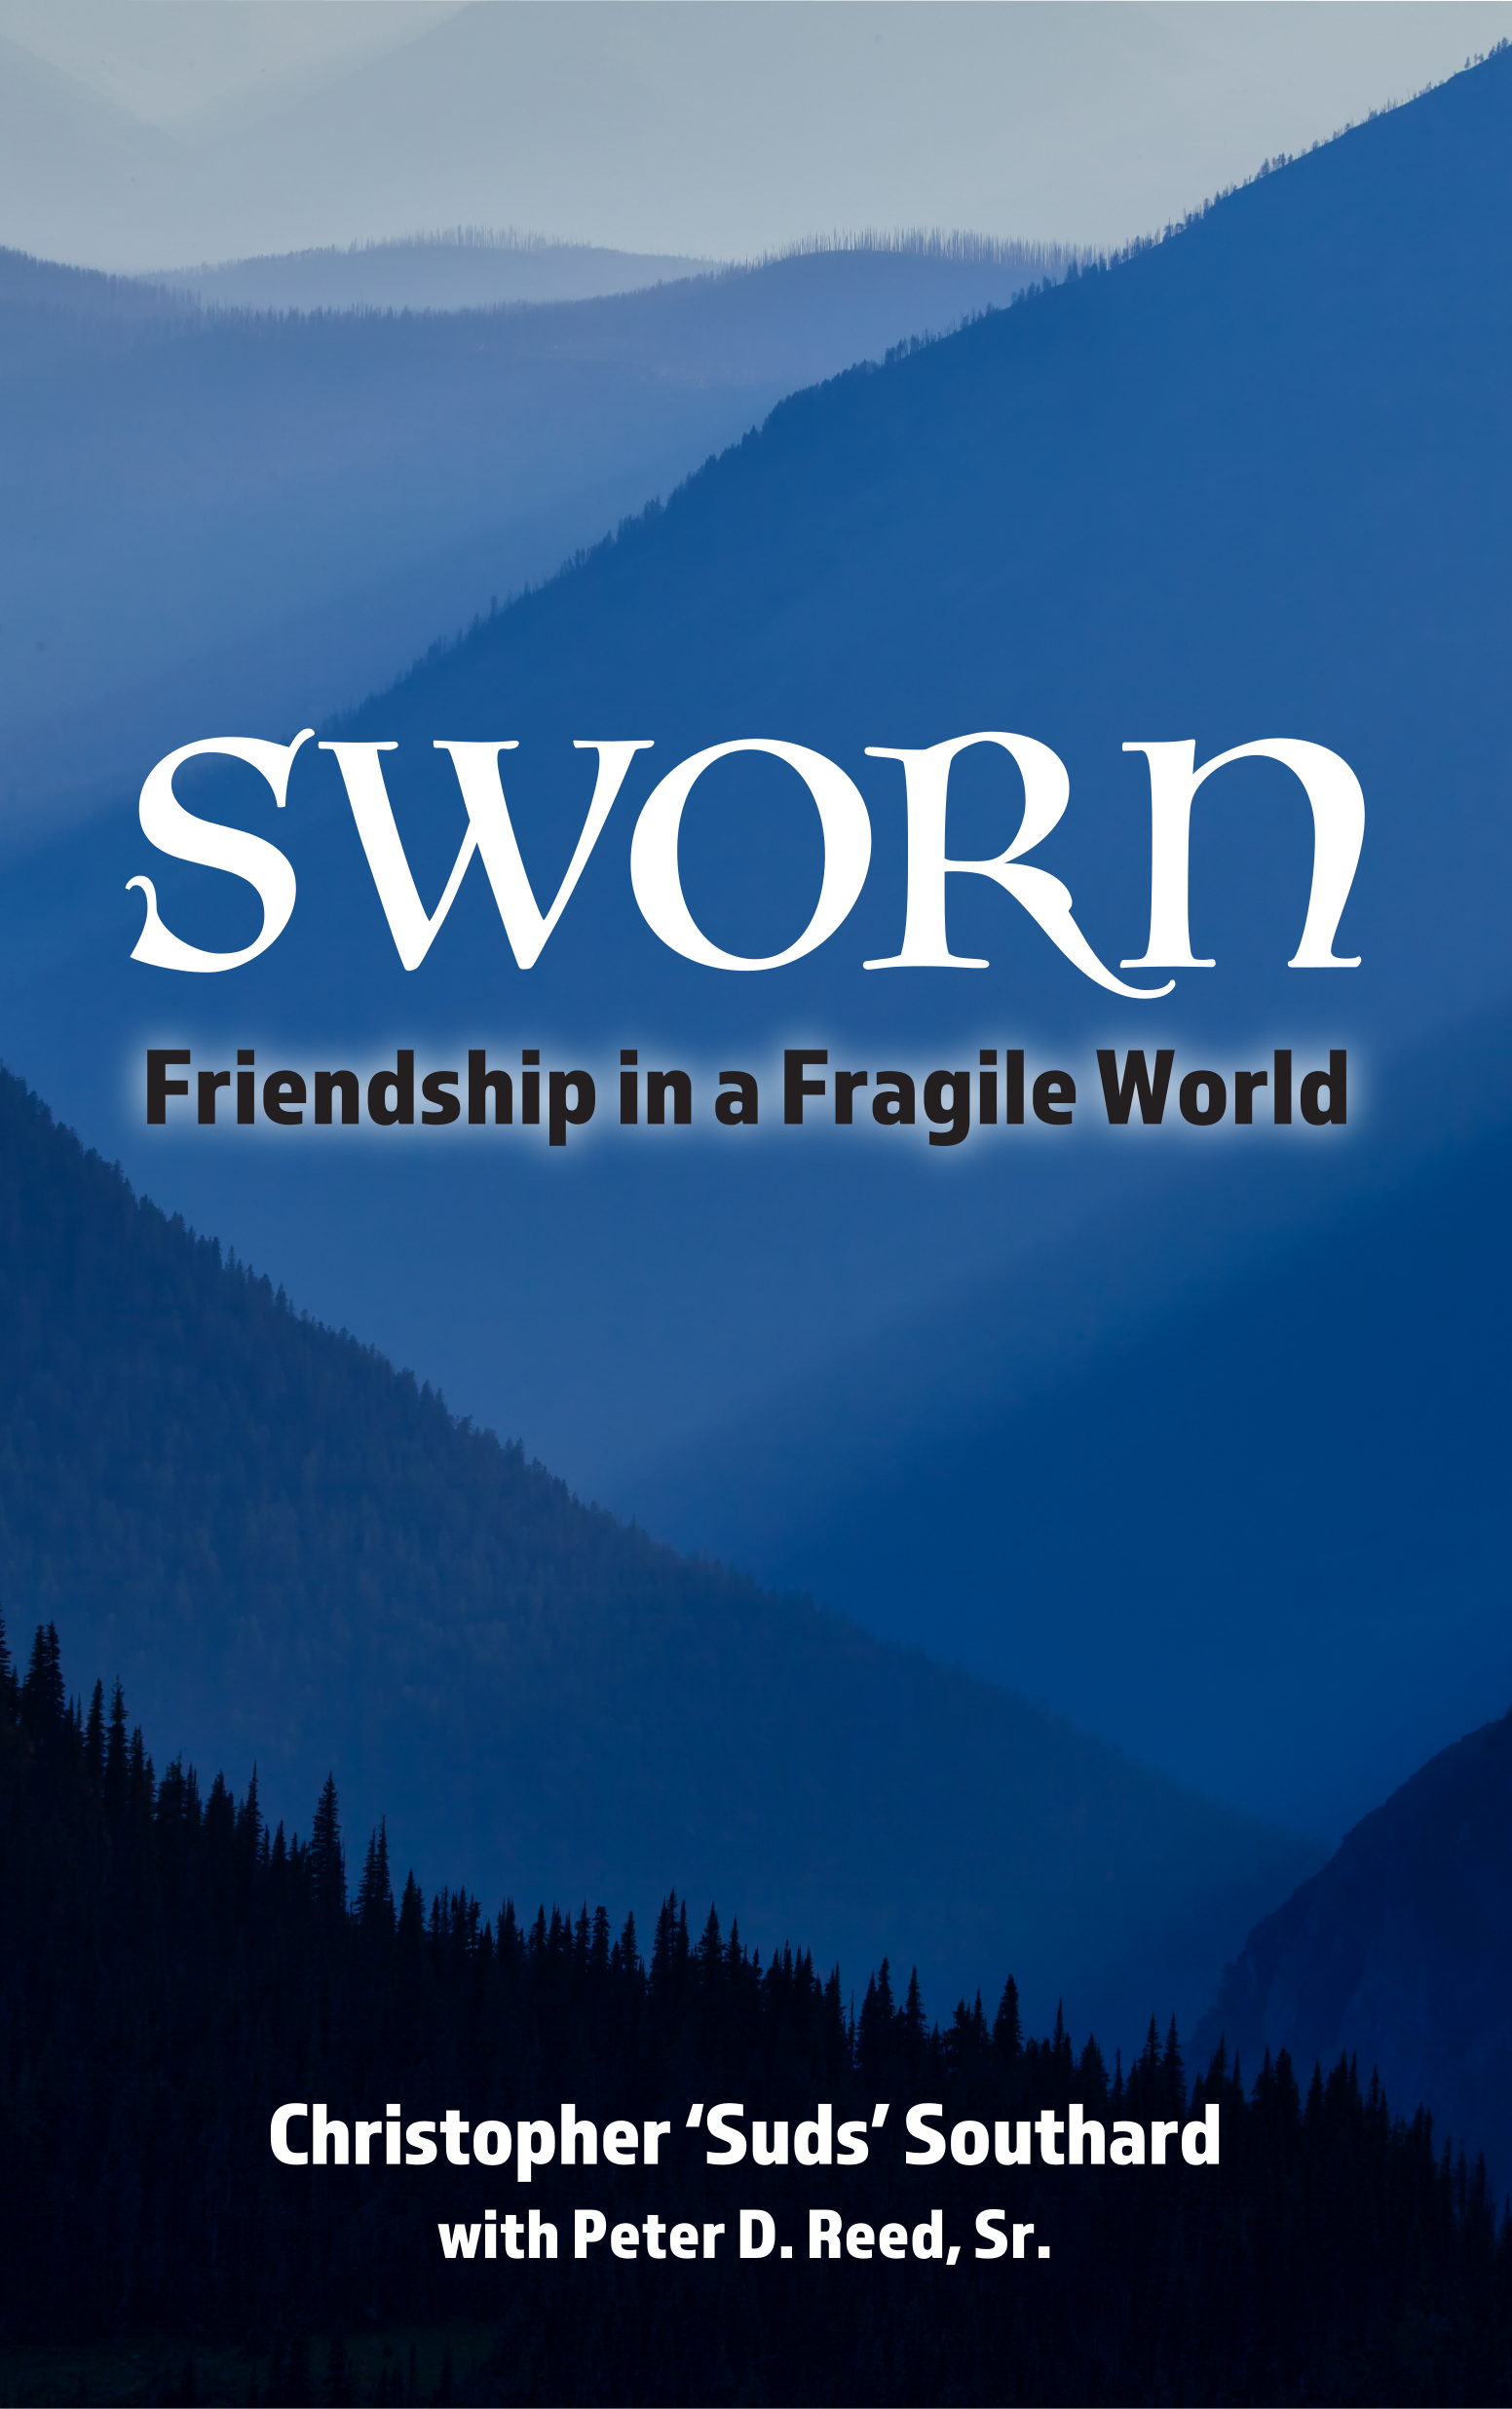 FREE: SWORN Friendship in a Fragile World by Christopher Southard